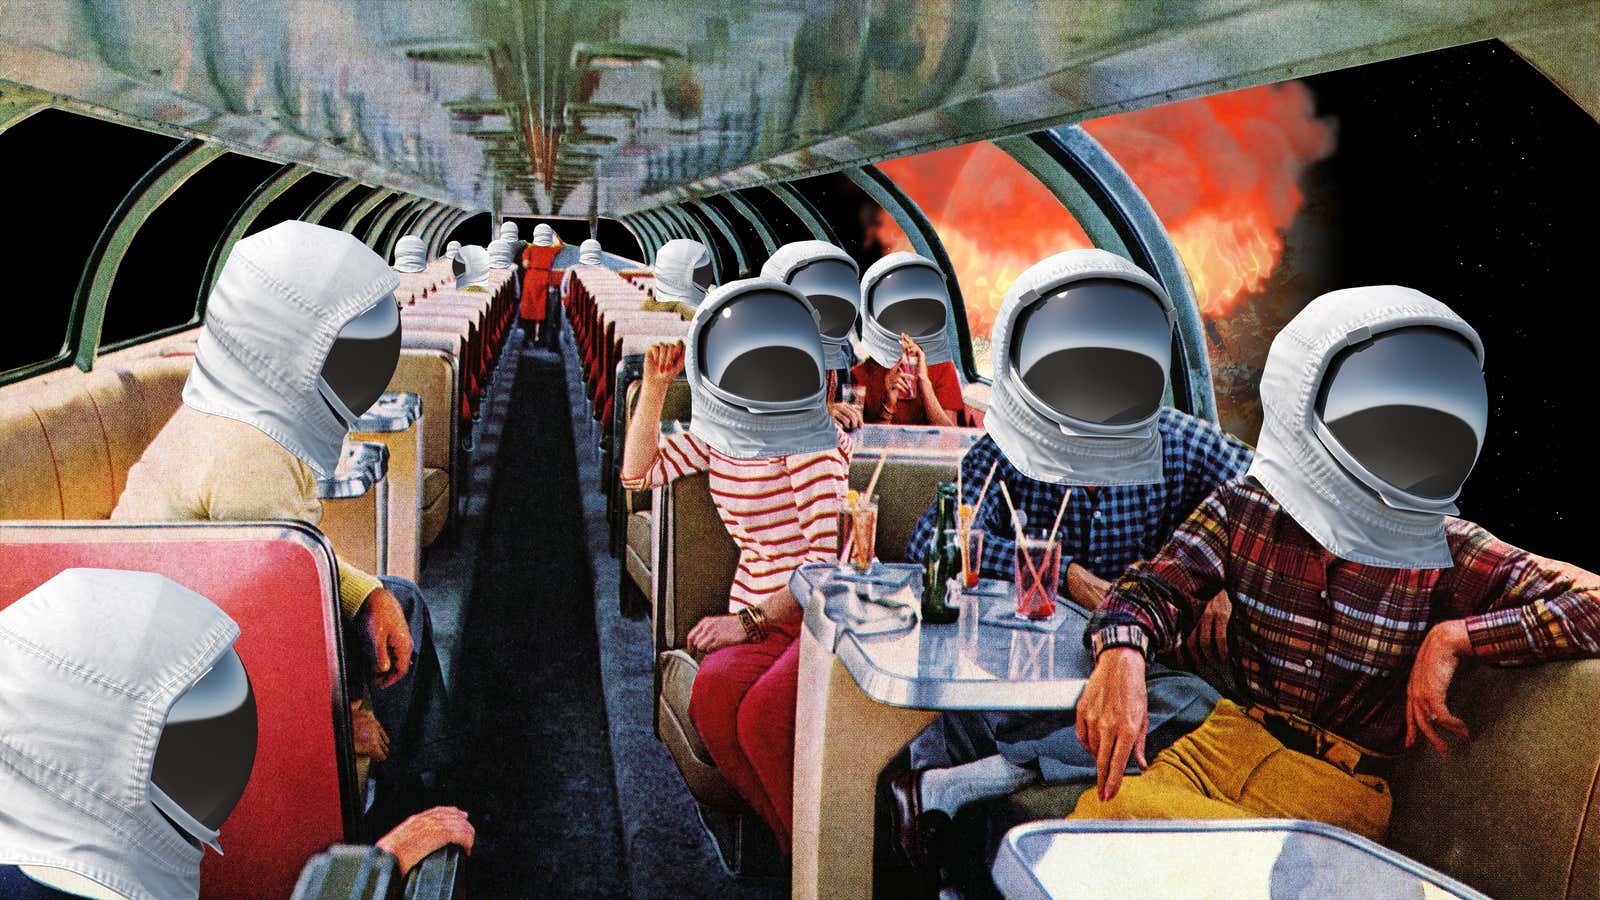 Space Tourism Is a Waste